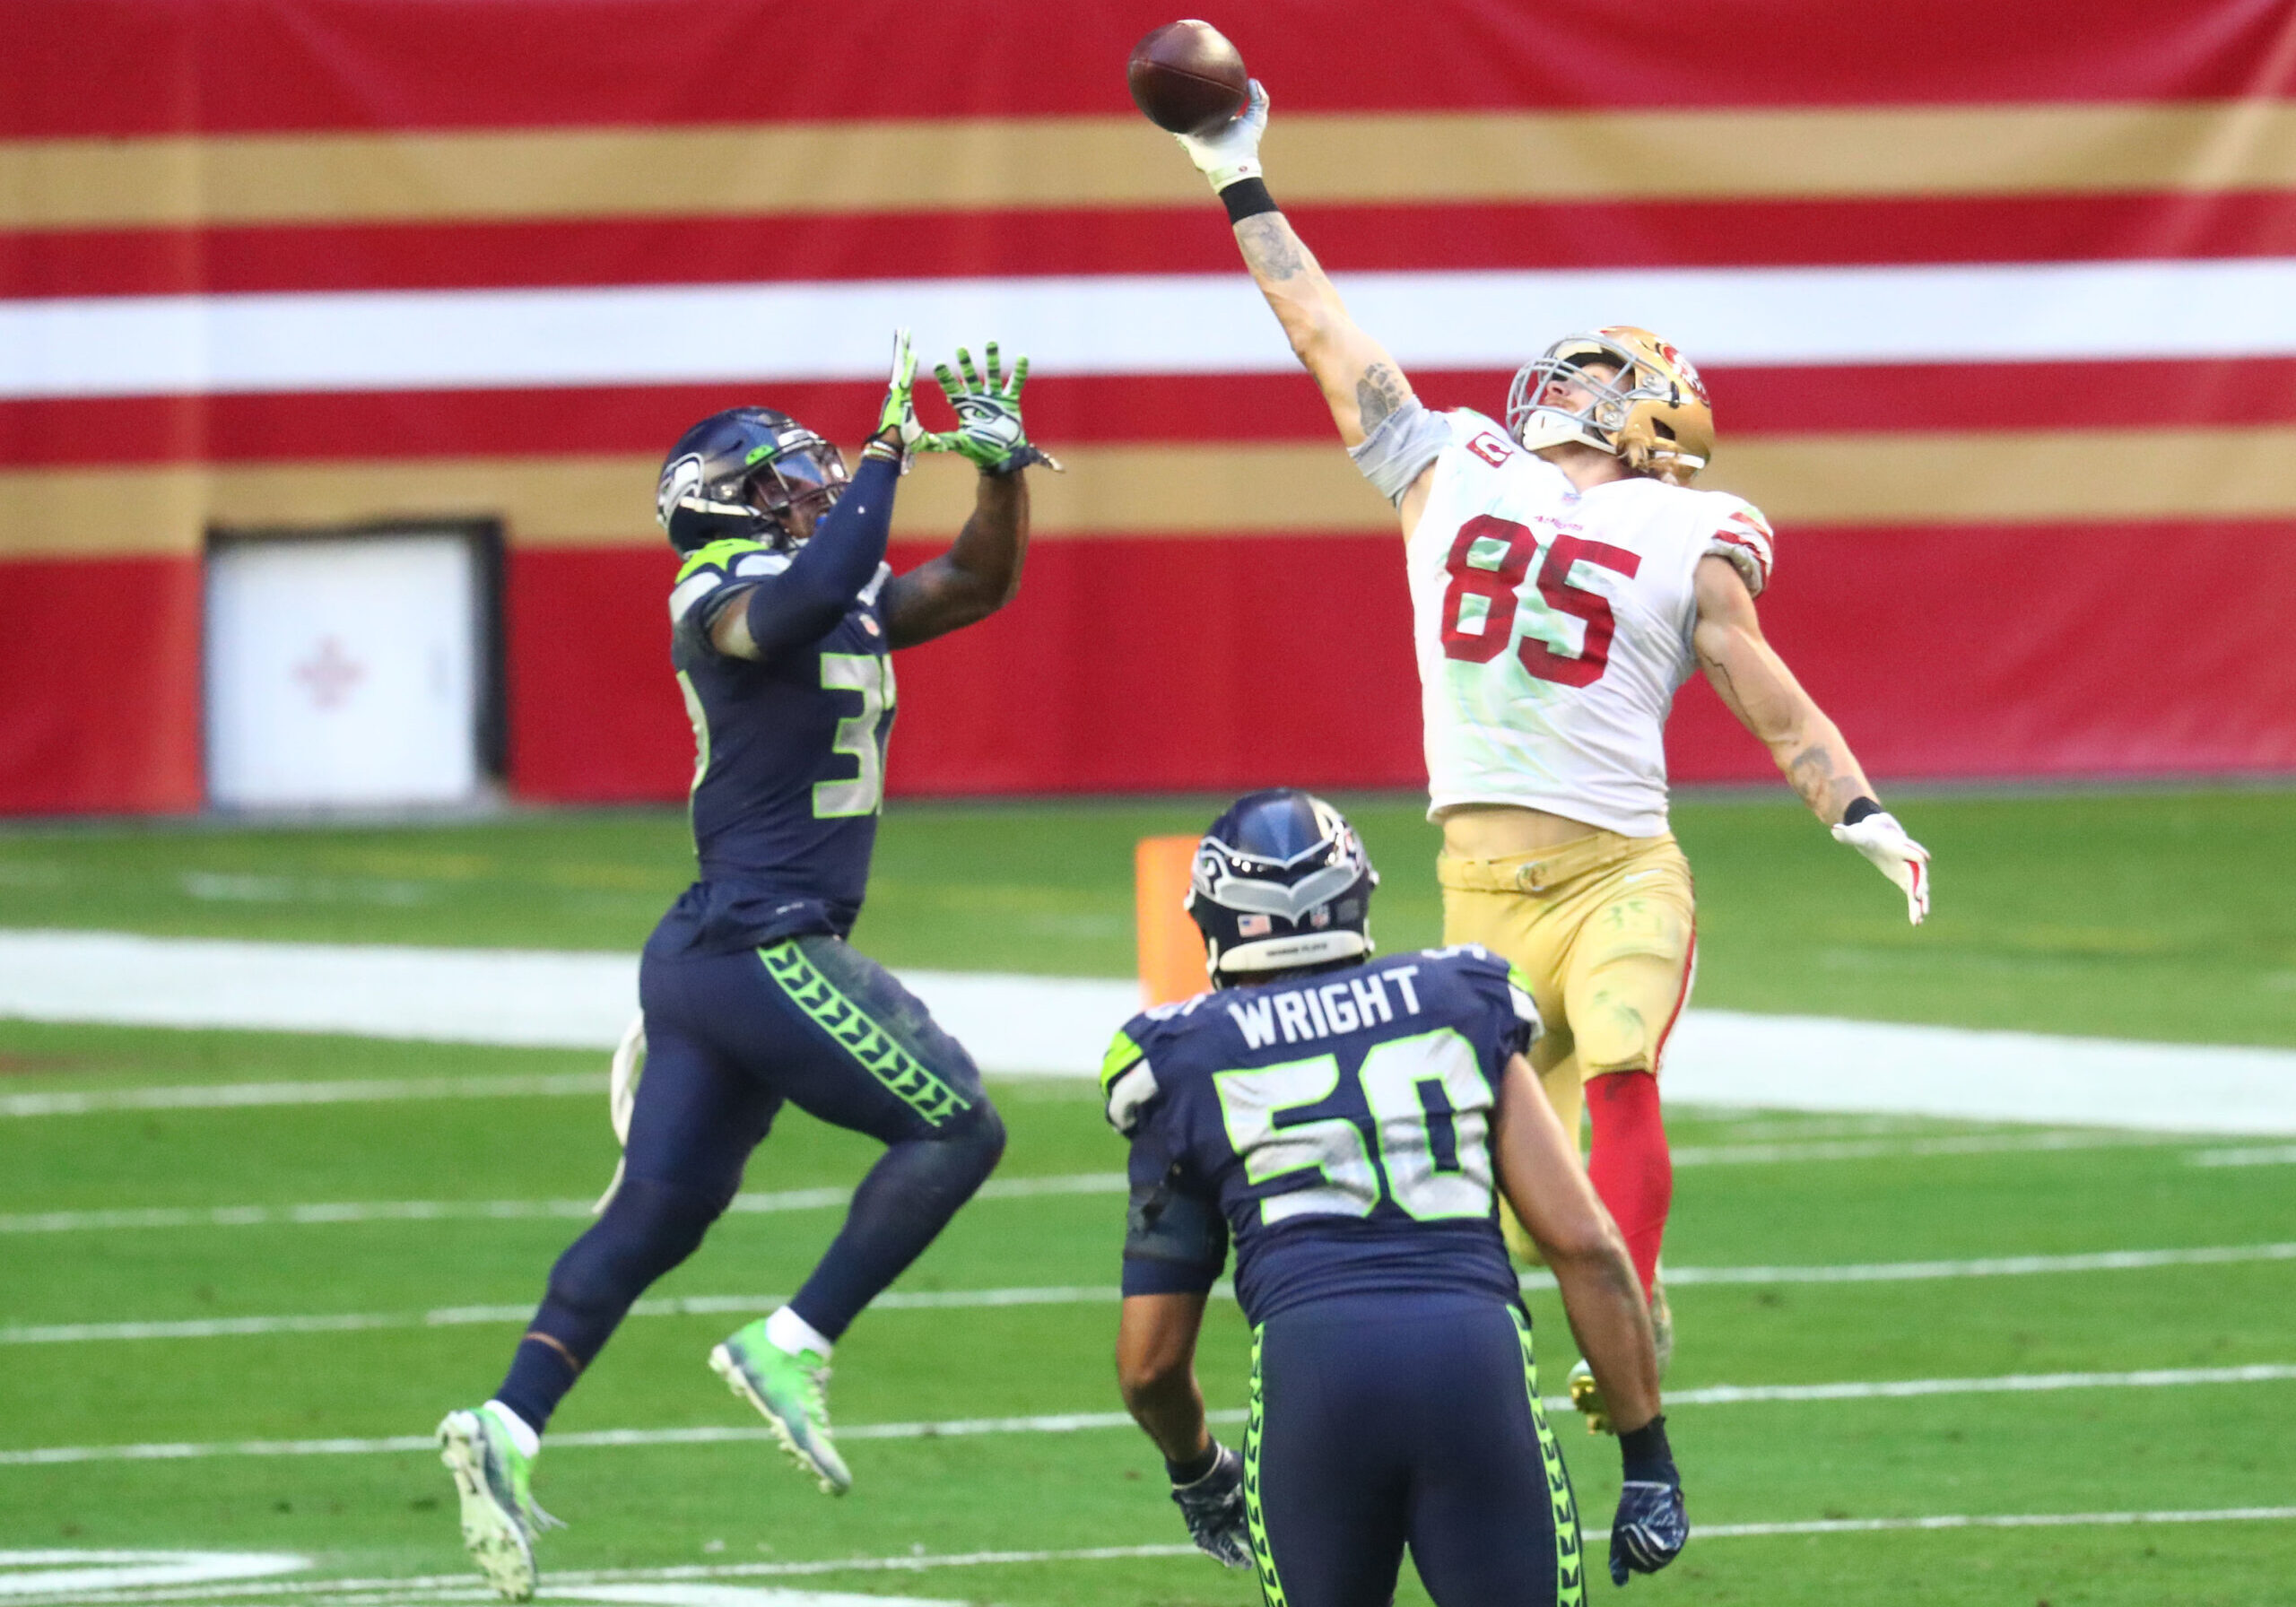 Jan 3, 2021; Glendale, Arizona, USA; San Francisco 49ers tight end George Kittle (85) makes a catch against Seattle Seahawks Seattle Seahawks free safety Quandre Diggs (37) during the second half at State Farm Stadium. Mandatory Credit: Mark J. Rebilas-USA TODAY Sports